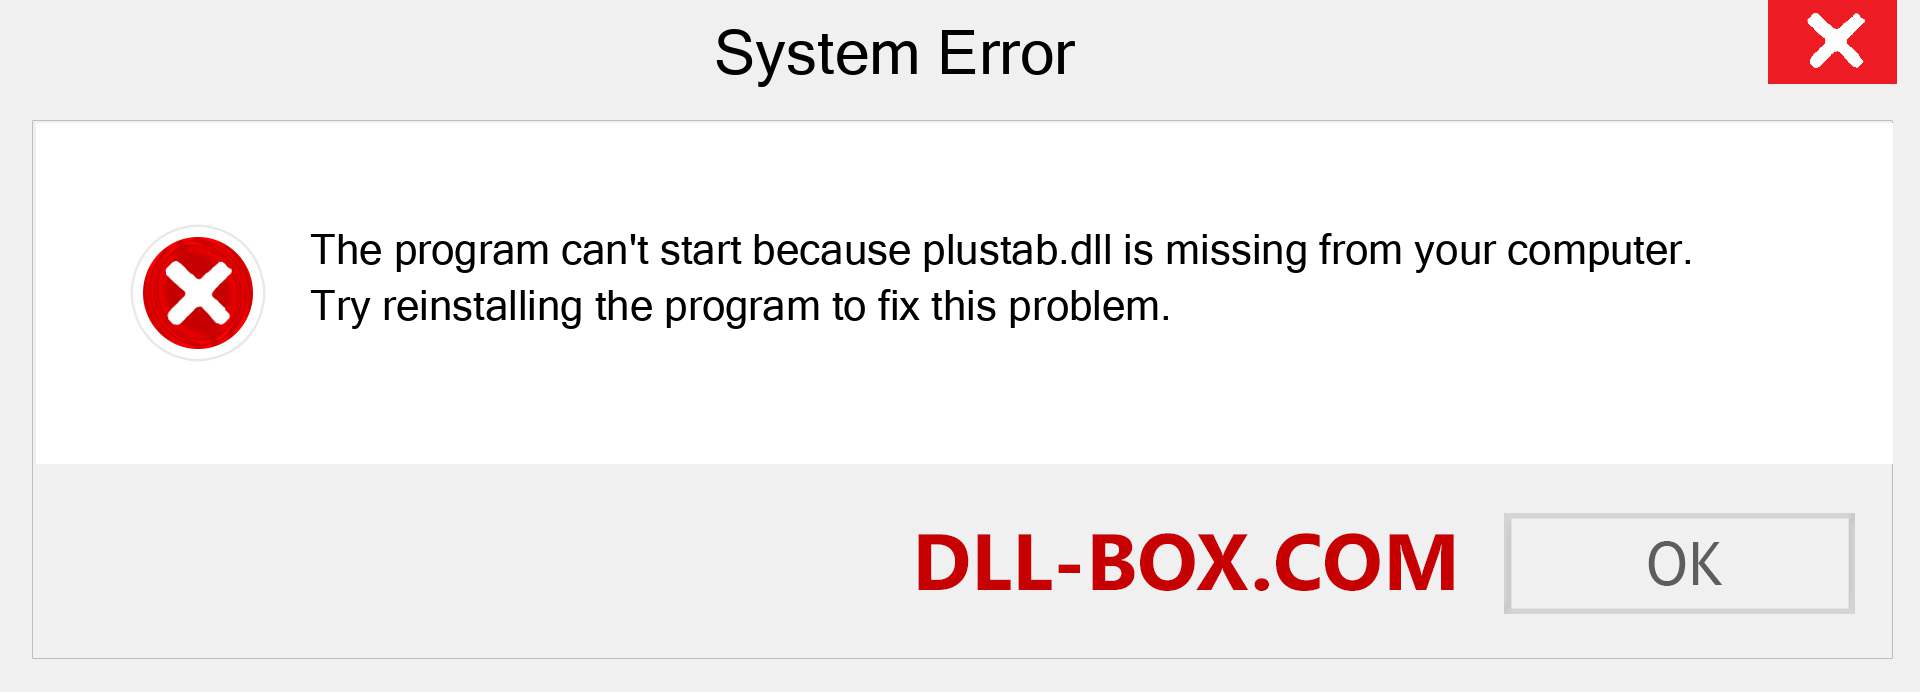  plustab.dll file is missing?. Download for Windows 7, 8, 10 - Fix  plustab dll Missing Error on Windows, photos, images